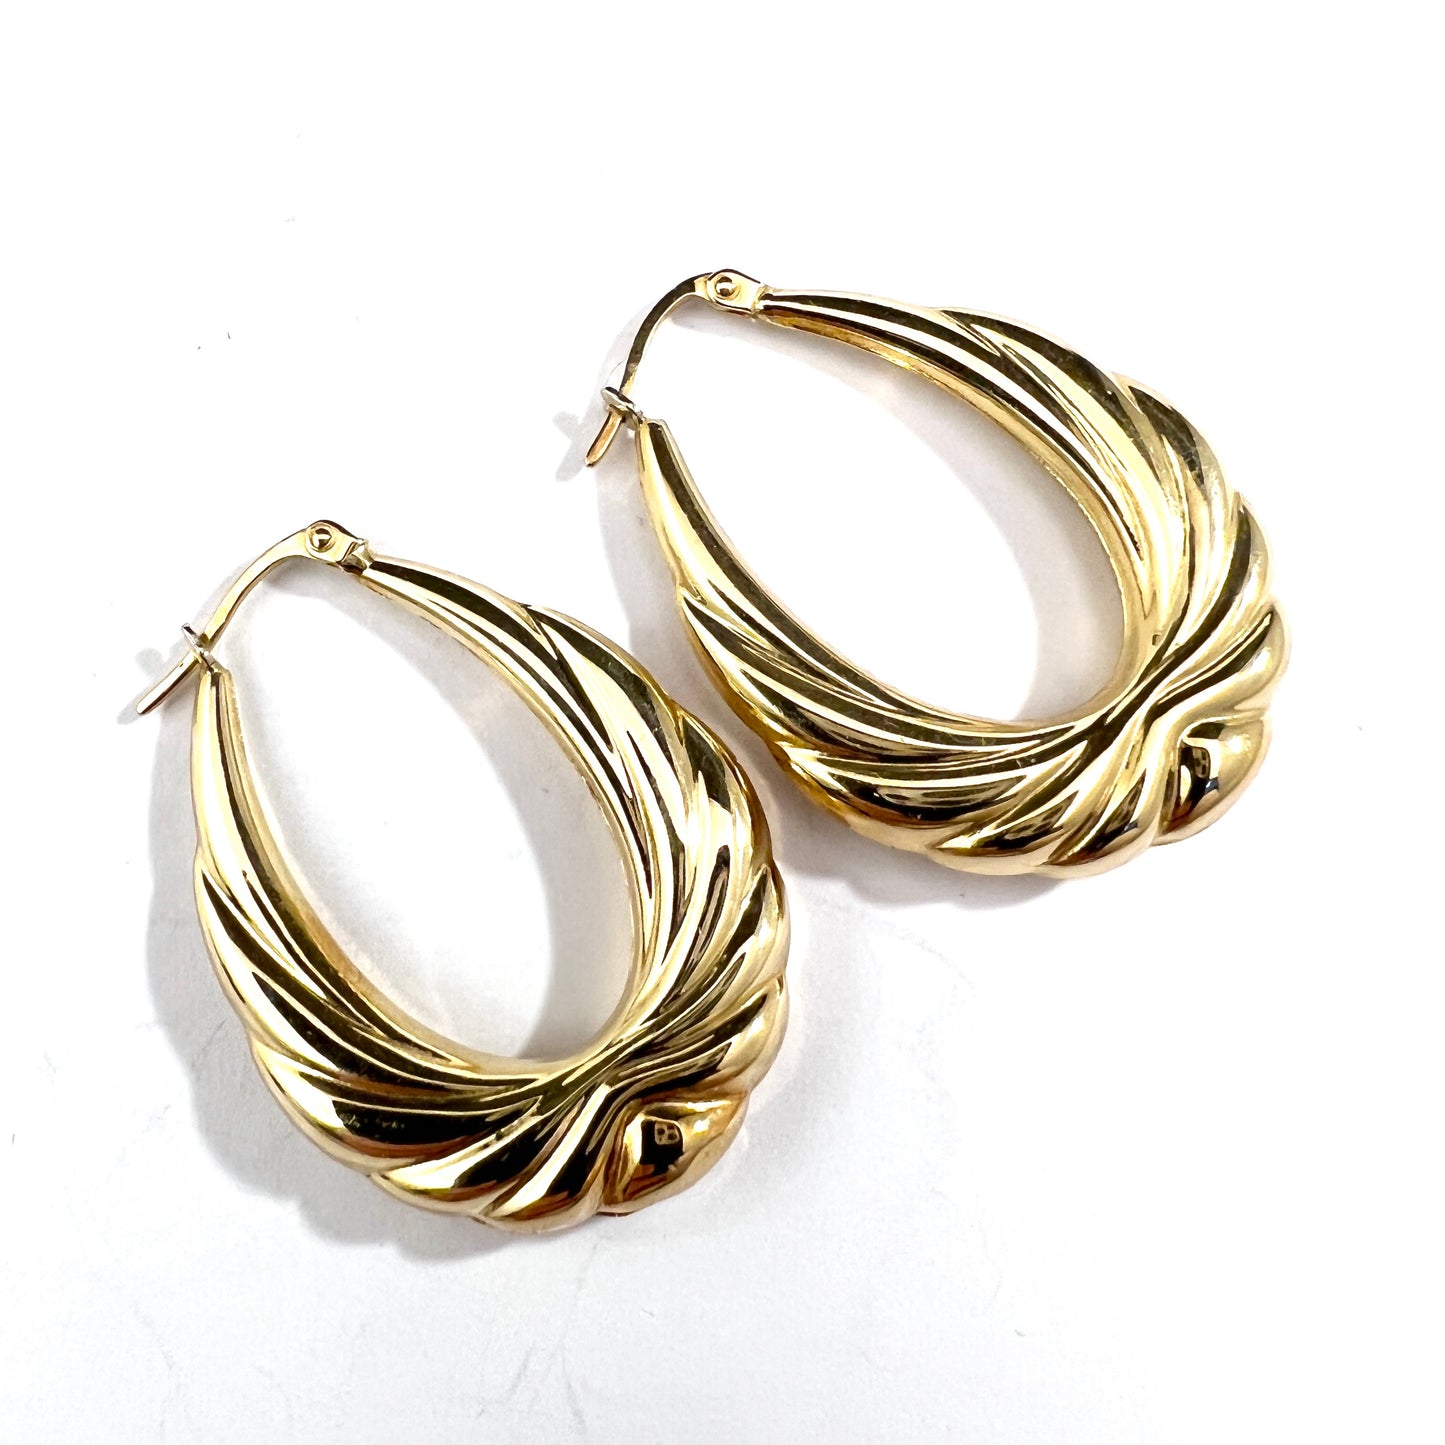 Uno A Erre, Arezzo, Italy 1970-80s. Large 18k Gold Earrings.